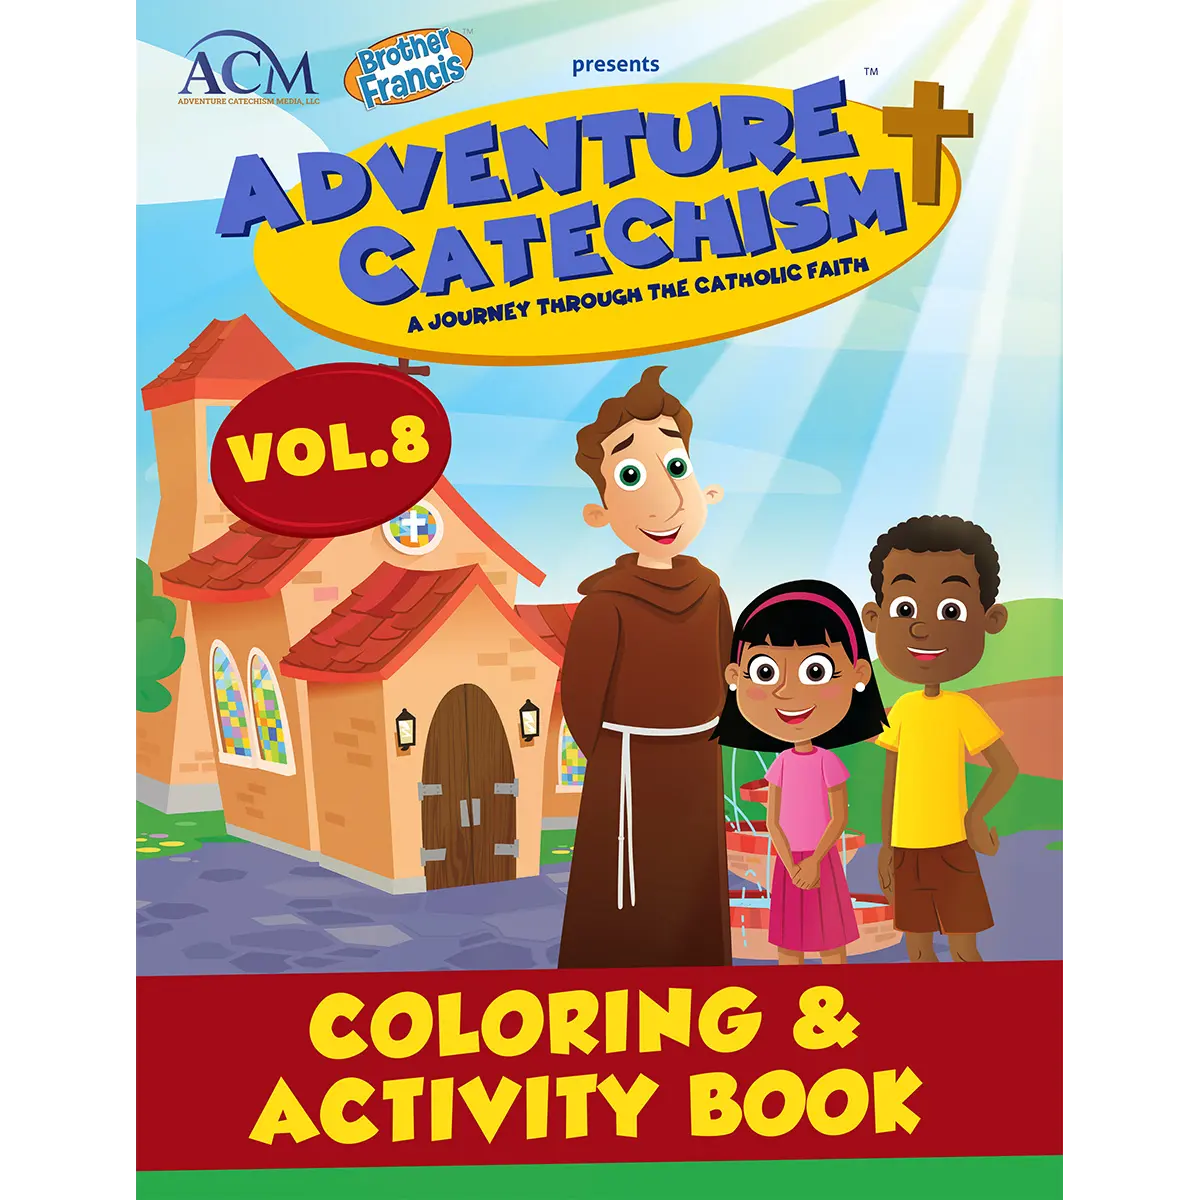 Adventure Catechism Volume 8 - Coloring and Activity Book